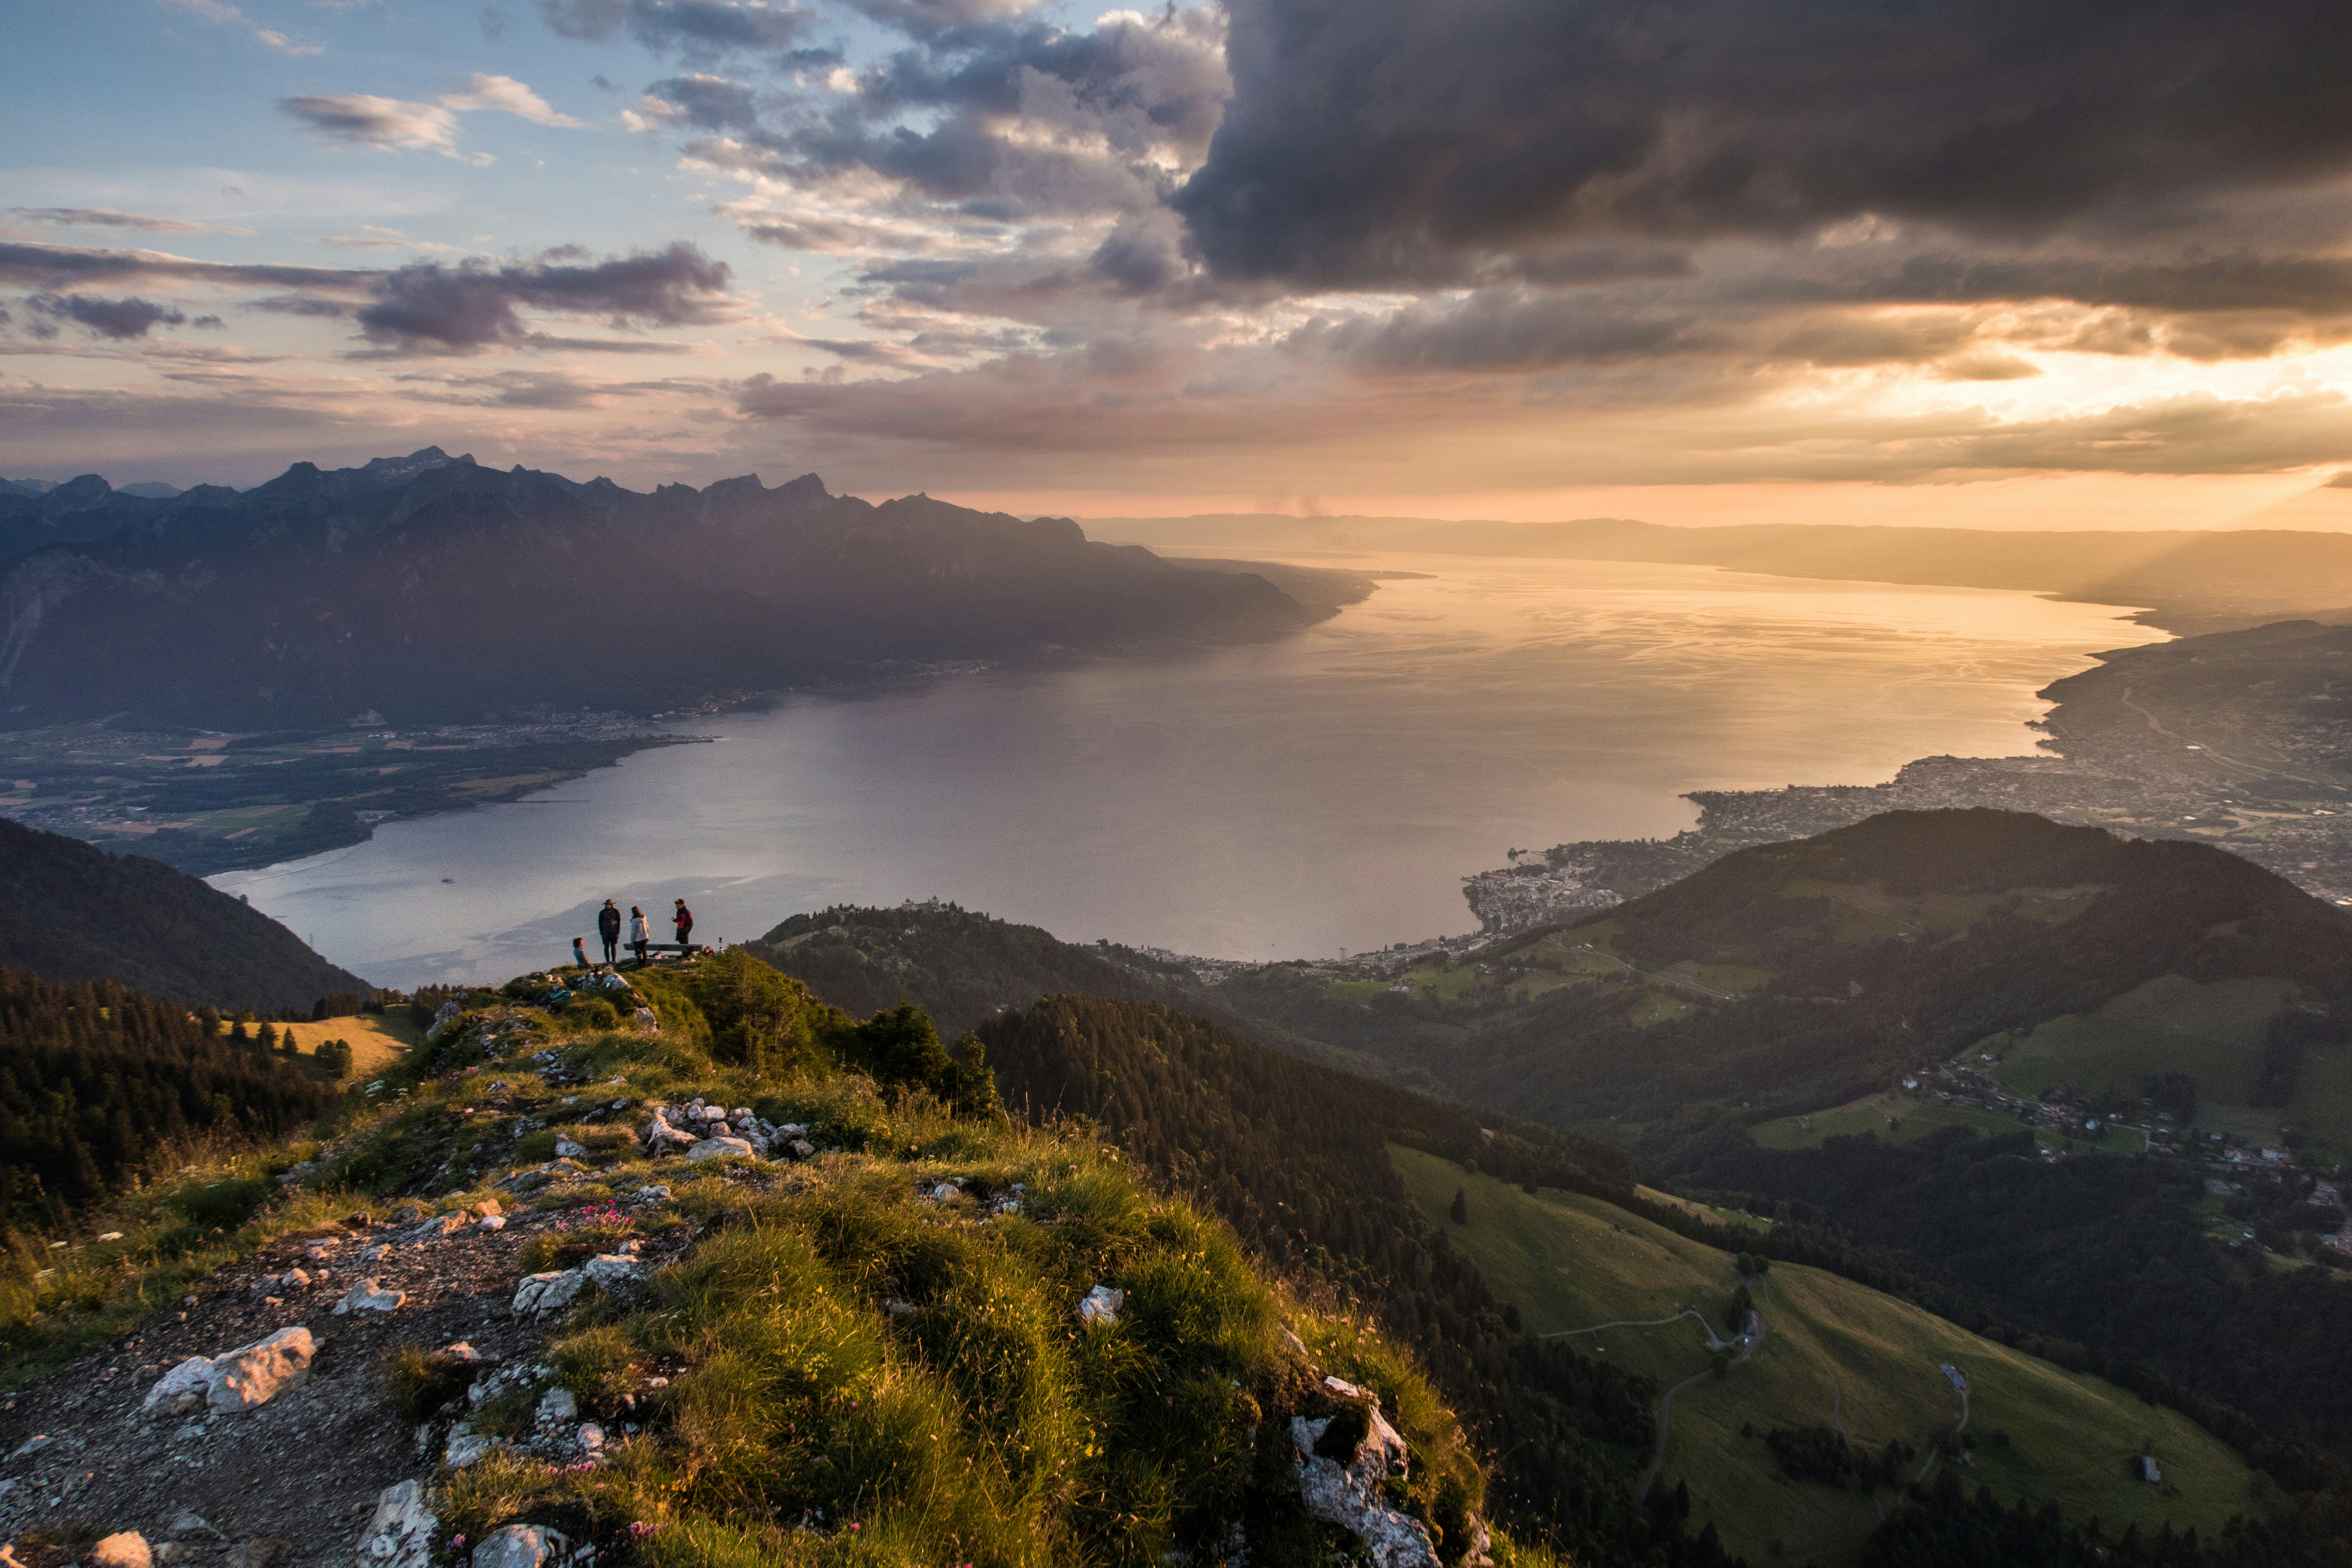 An evening trail running outing up to la Dent de Jaman, above the Lac Léman (lake of Geneva in English). A lovely place for a pic-nic with one of the best views in the region above Montreux.